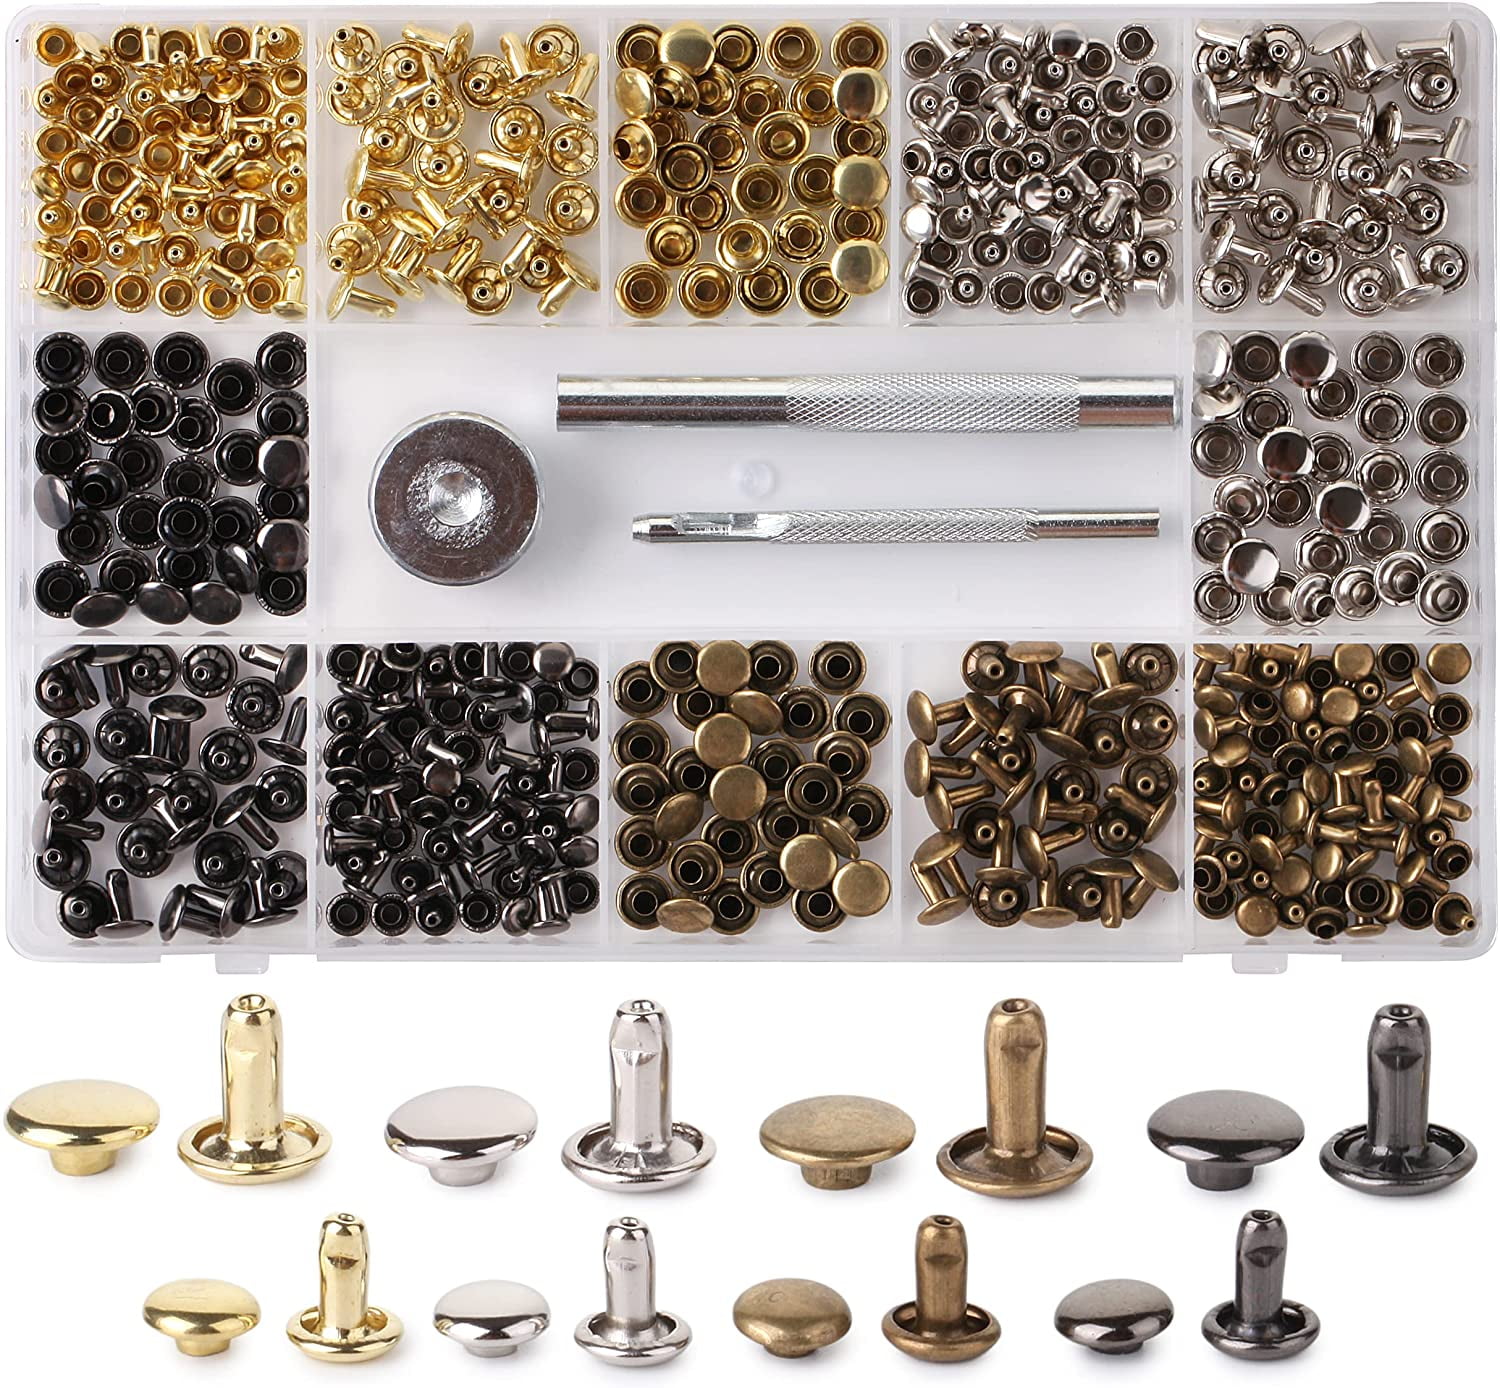 UNCO- Leather Rivets Kit, 4 Colors, 2 Sizes, 240 Pcs, Tubular Metal Studs  with Fixing Tools, Double Cap Rivets, Rivets for Leather, Rivets For  Fabric